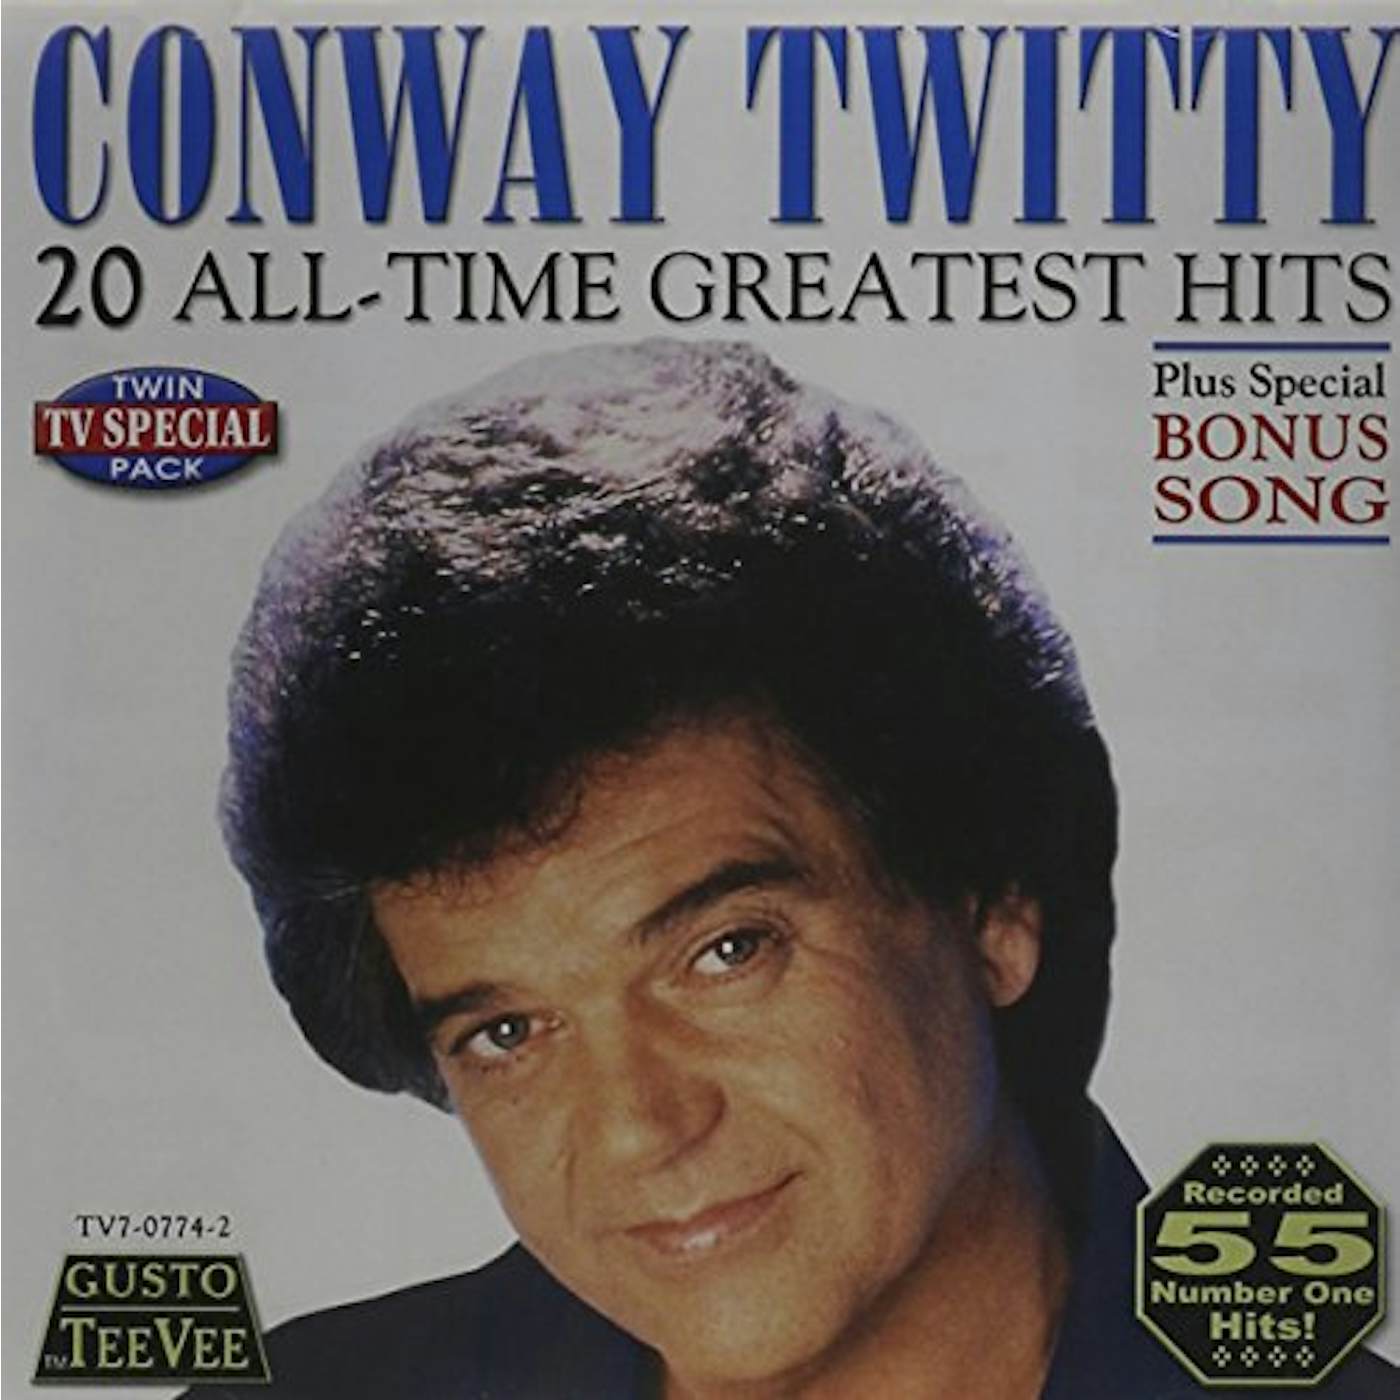 Conway Twitty 20 ALL TIME GREATEST HITS CD